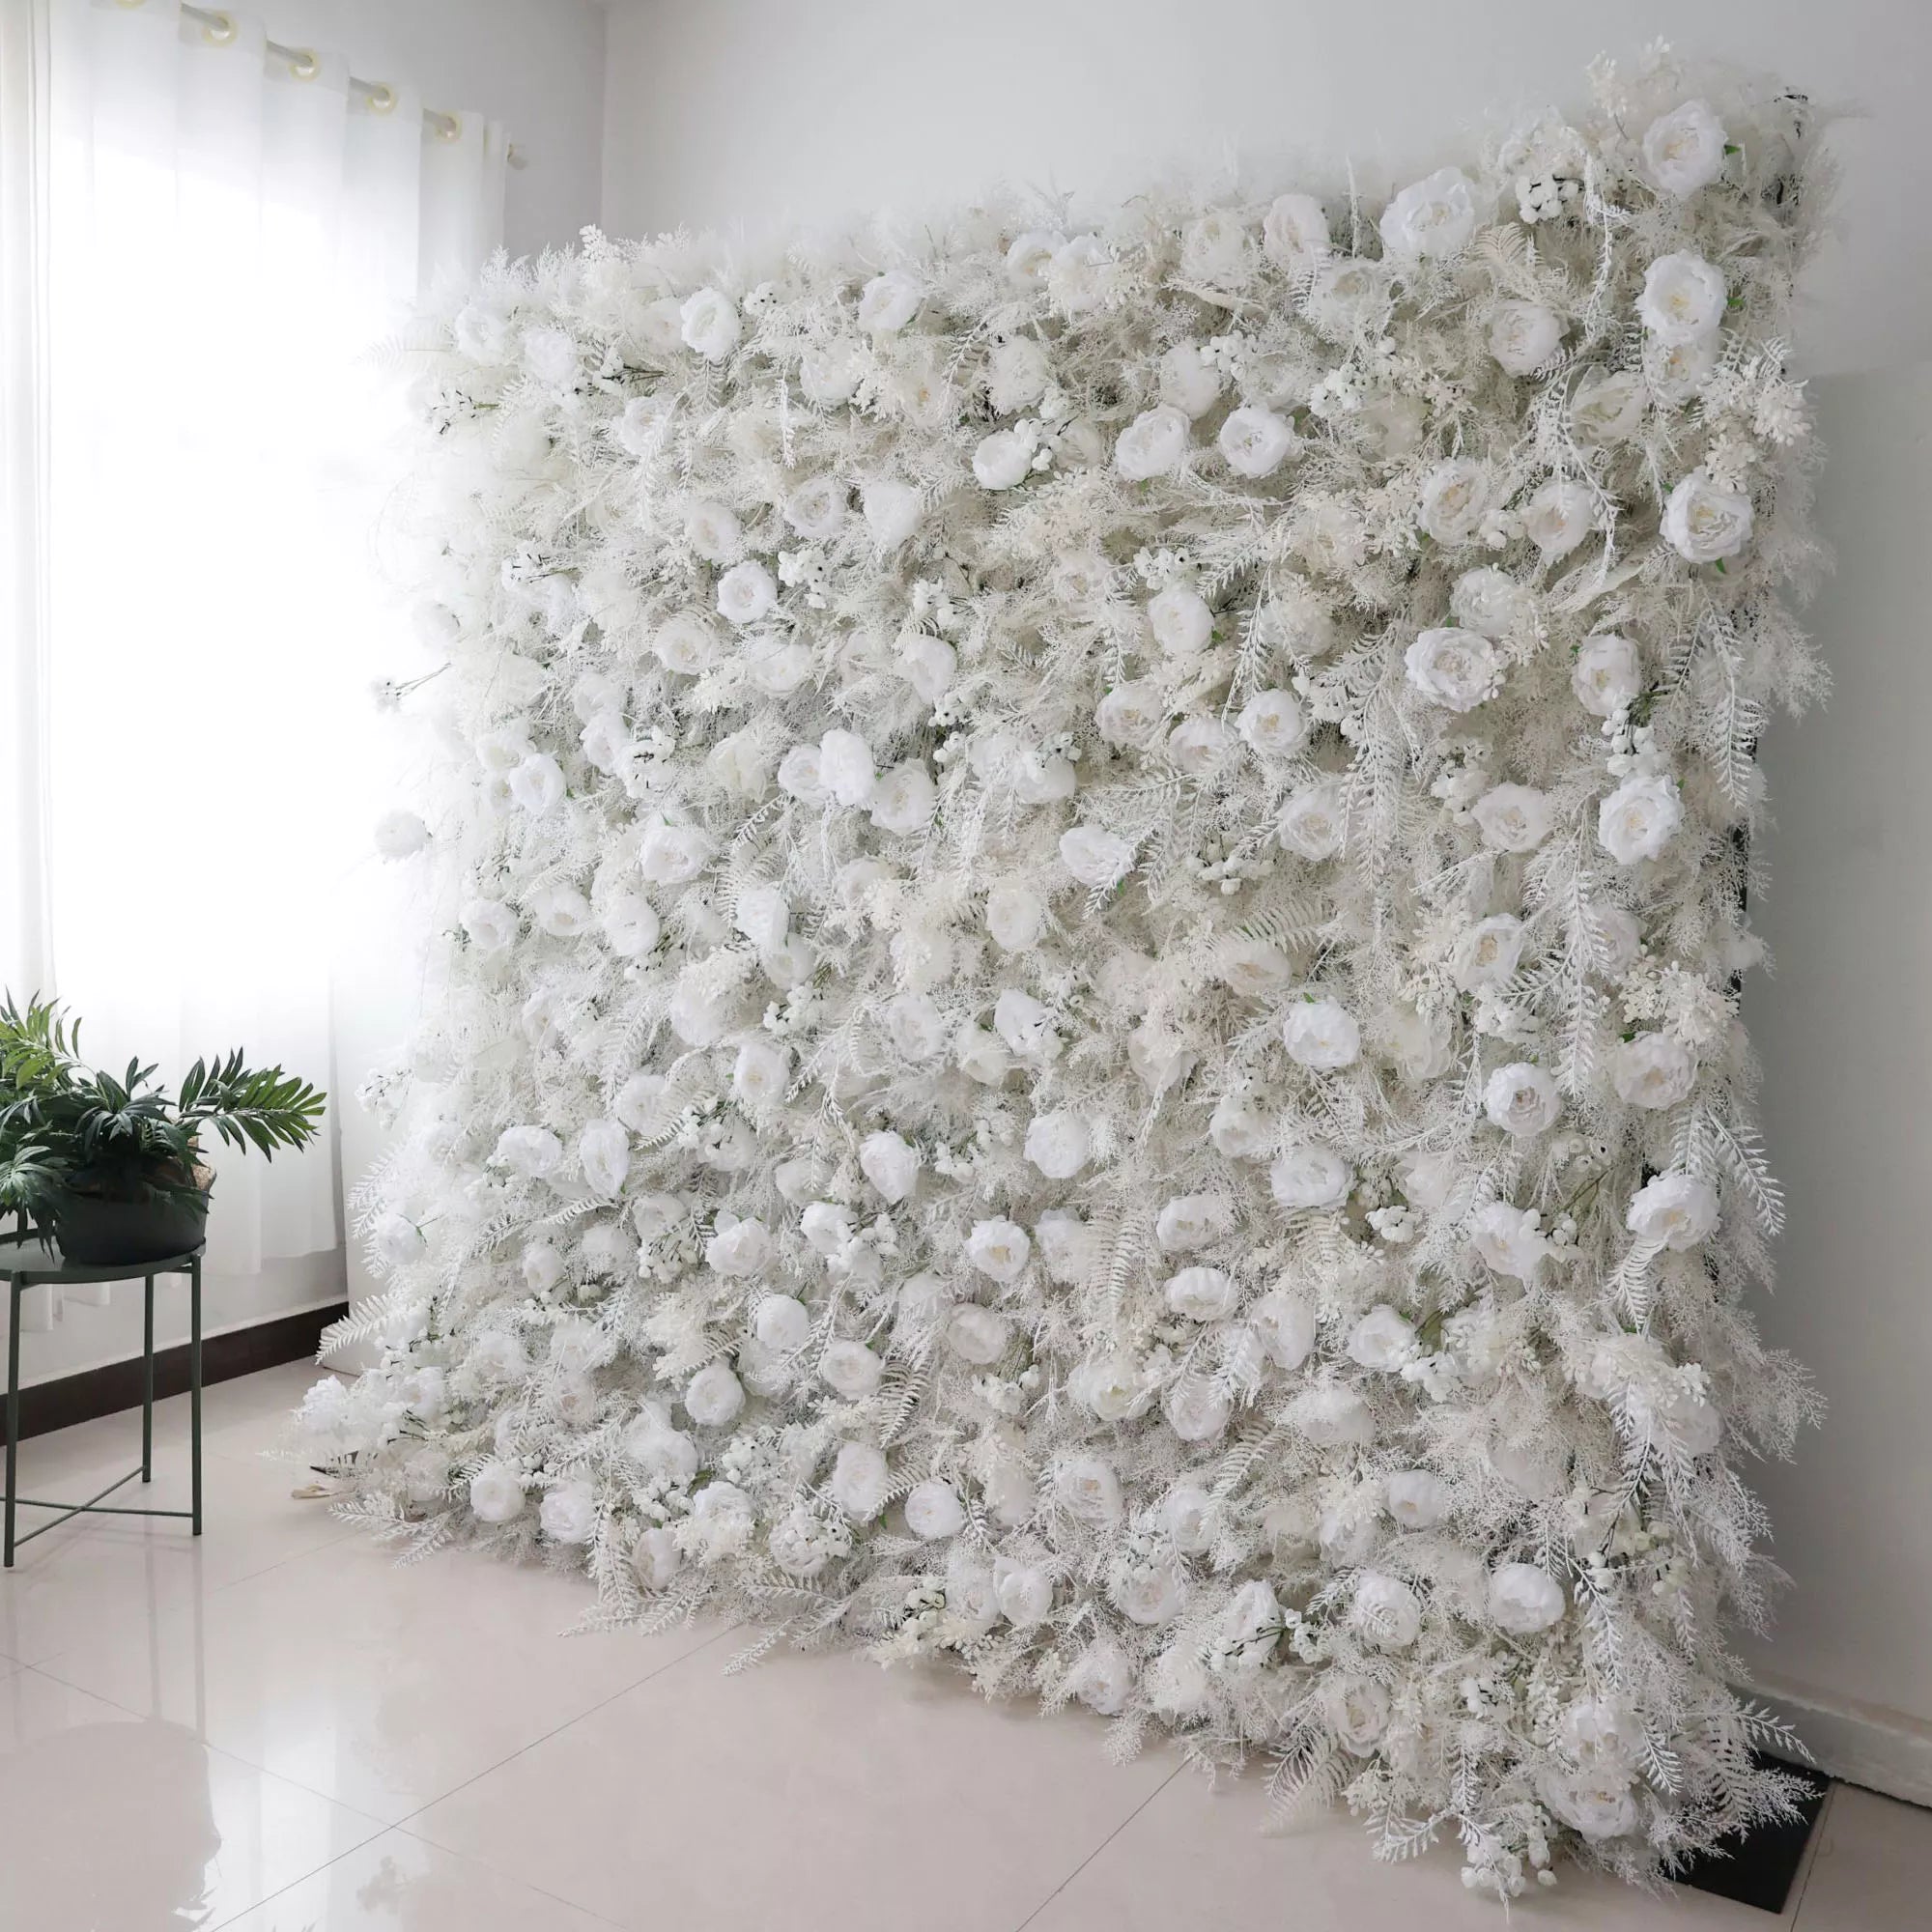 Valar Flowers Snowy White Floral Wall with Frosty Fern Accents: Capturing Winter's Essence for Luxe EventsVF-202